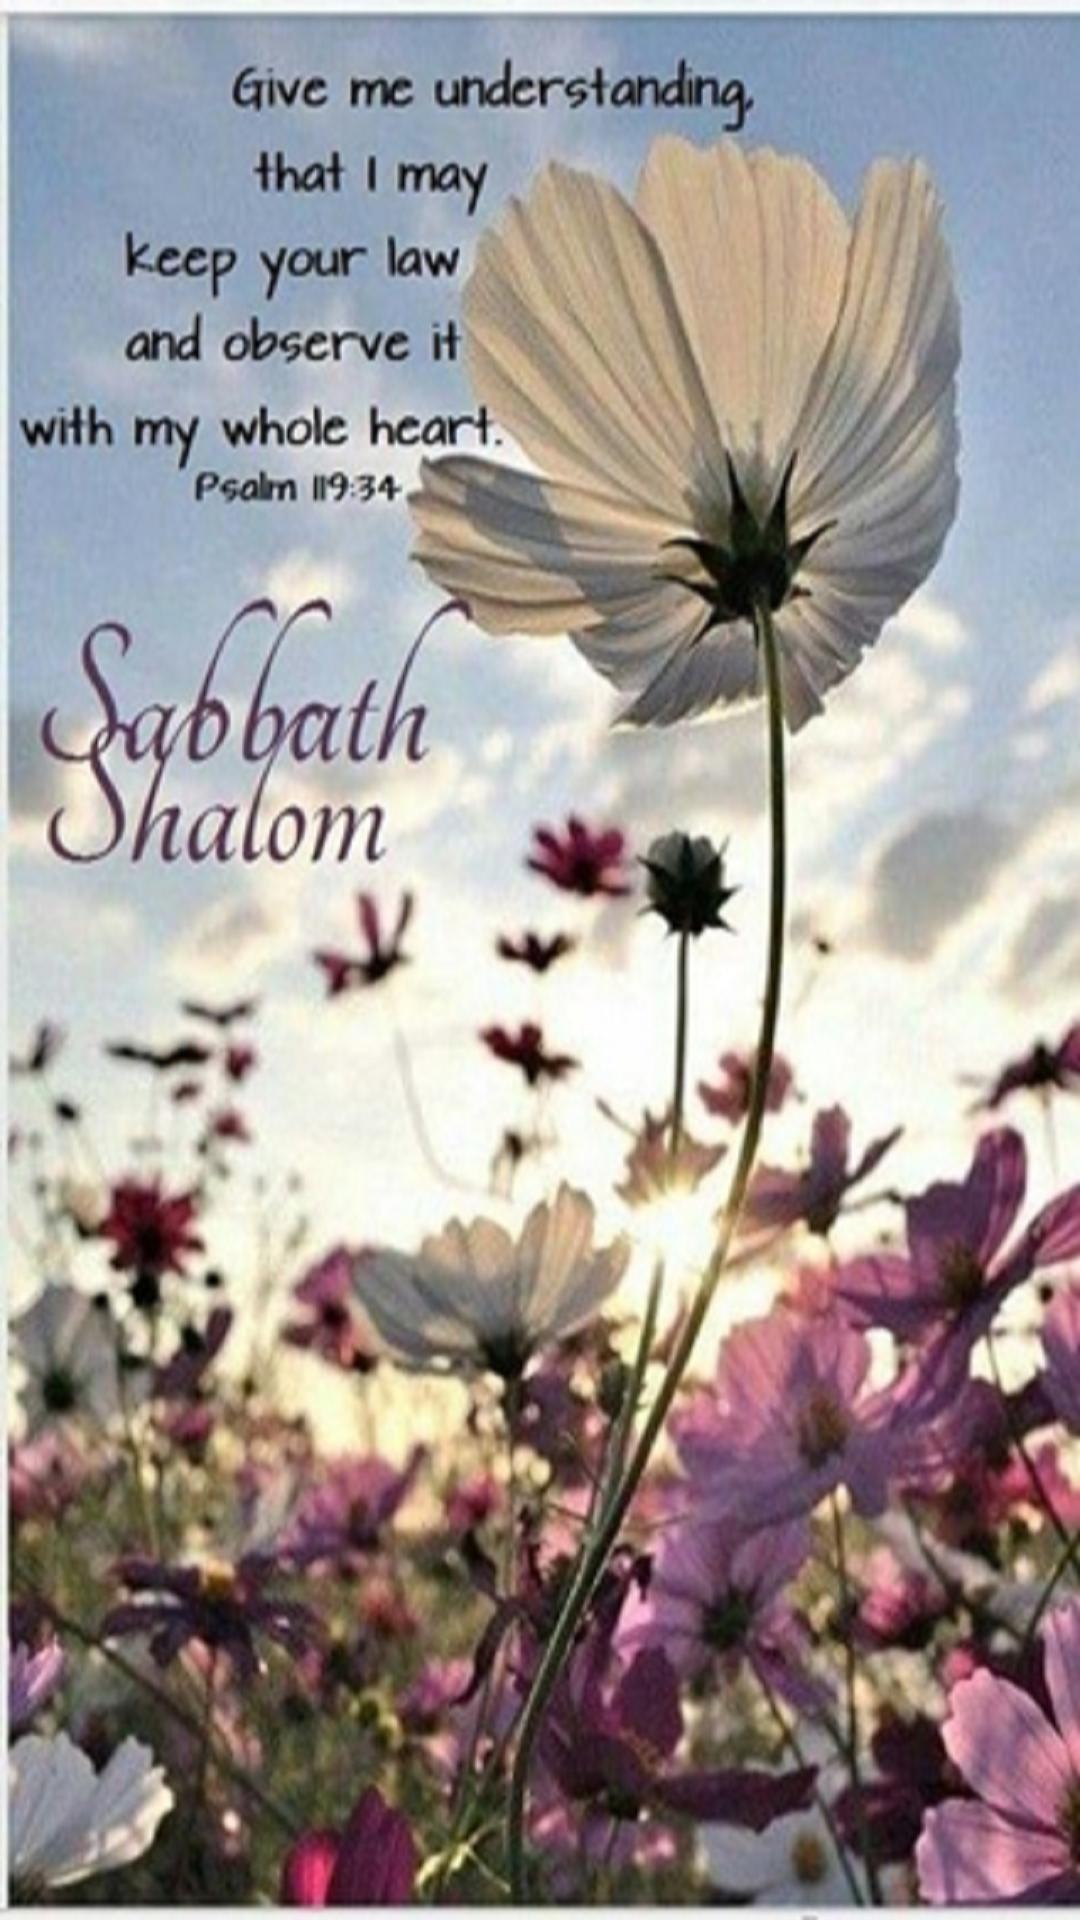 Happy Sabbath Quotes For Android Apk Download